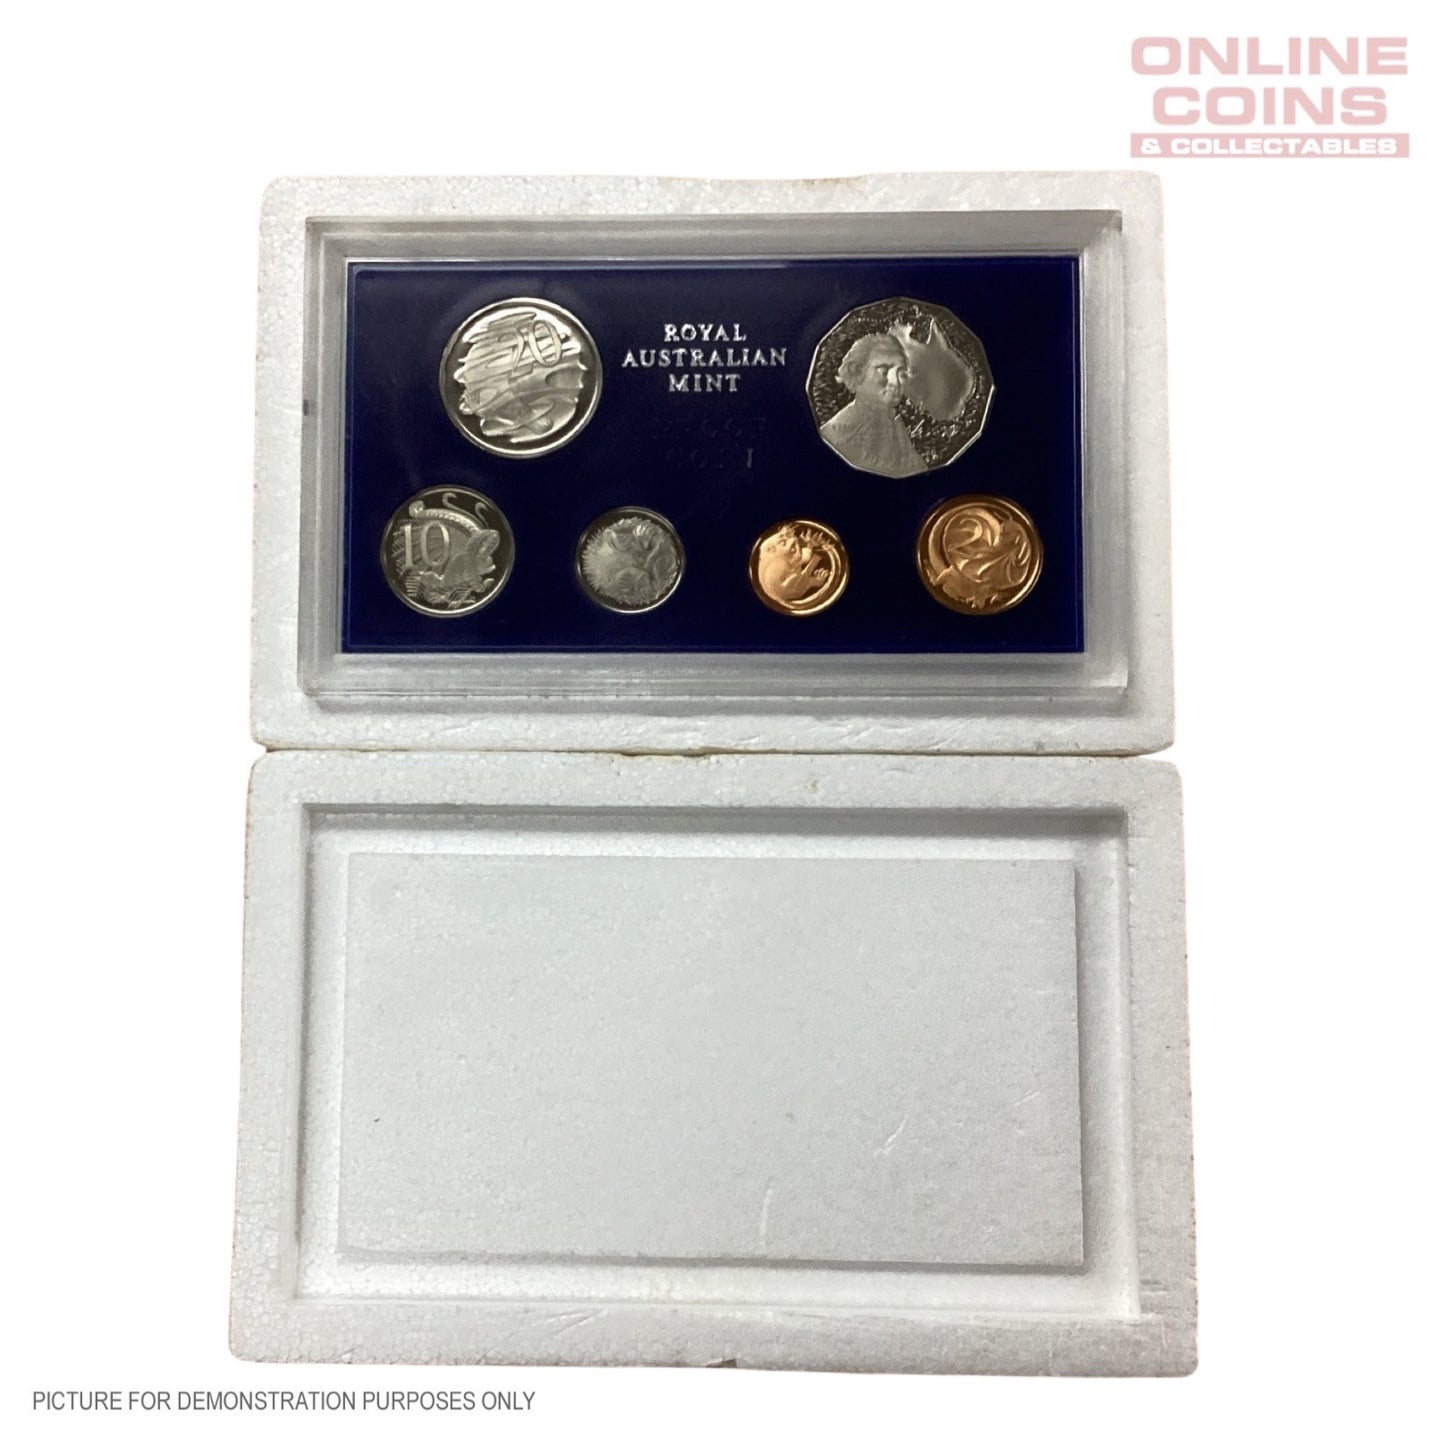 1970 Royal Australian Mint 6 Coin Proof Set In Foams - Heavily Rotated